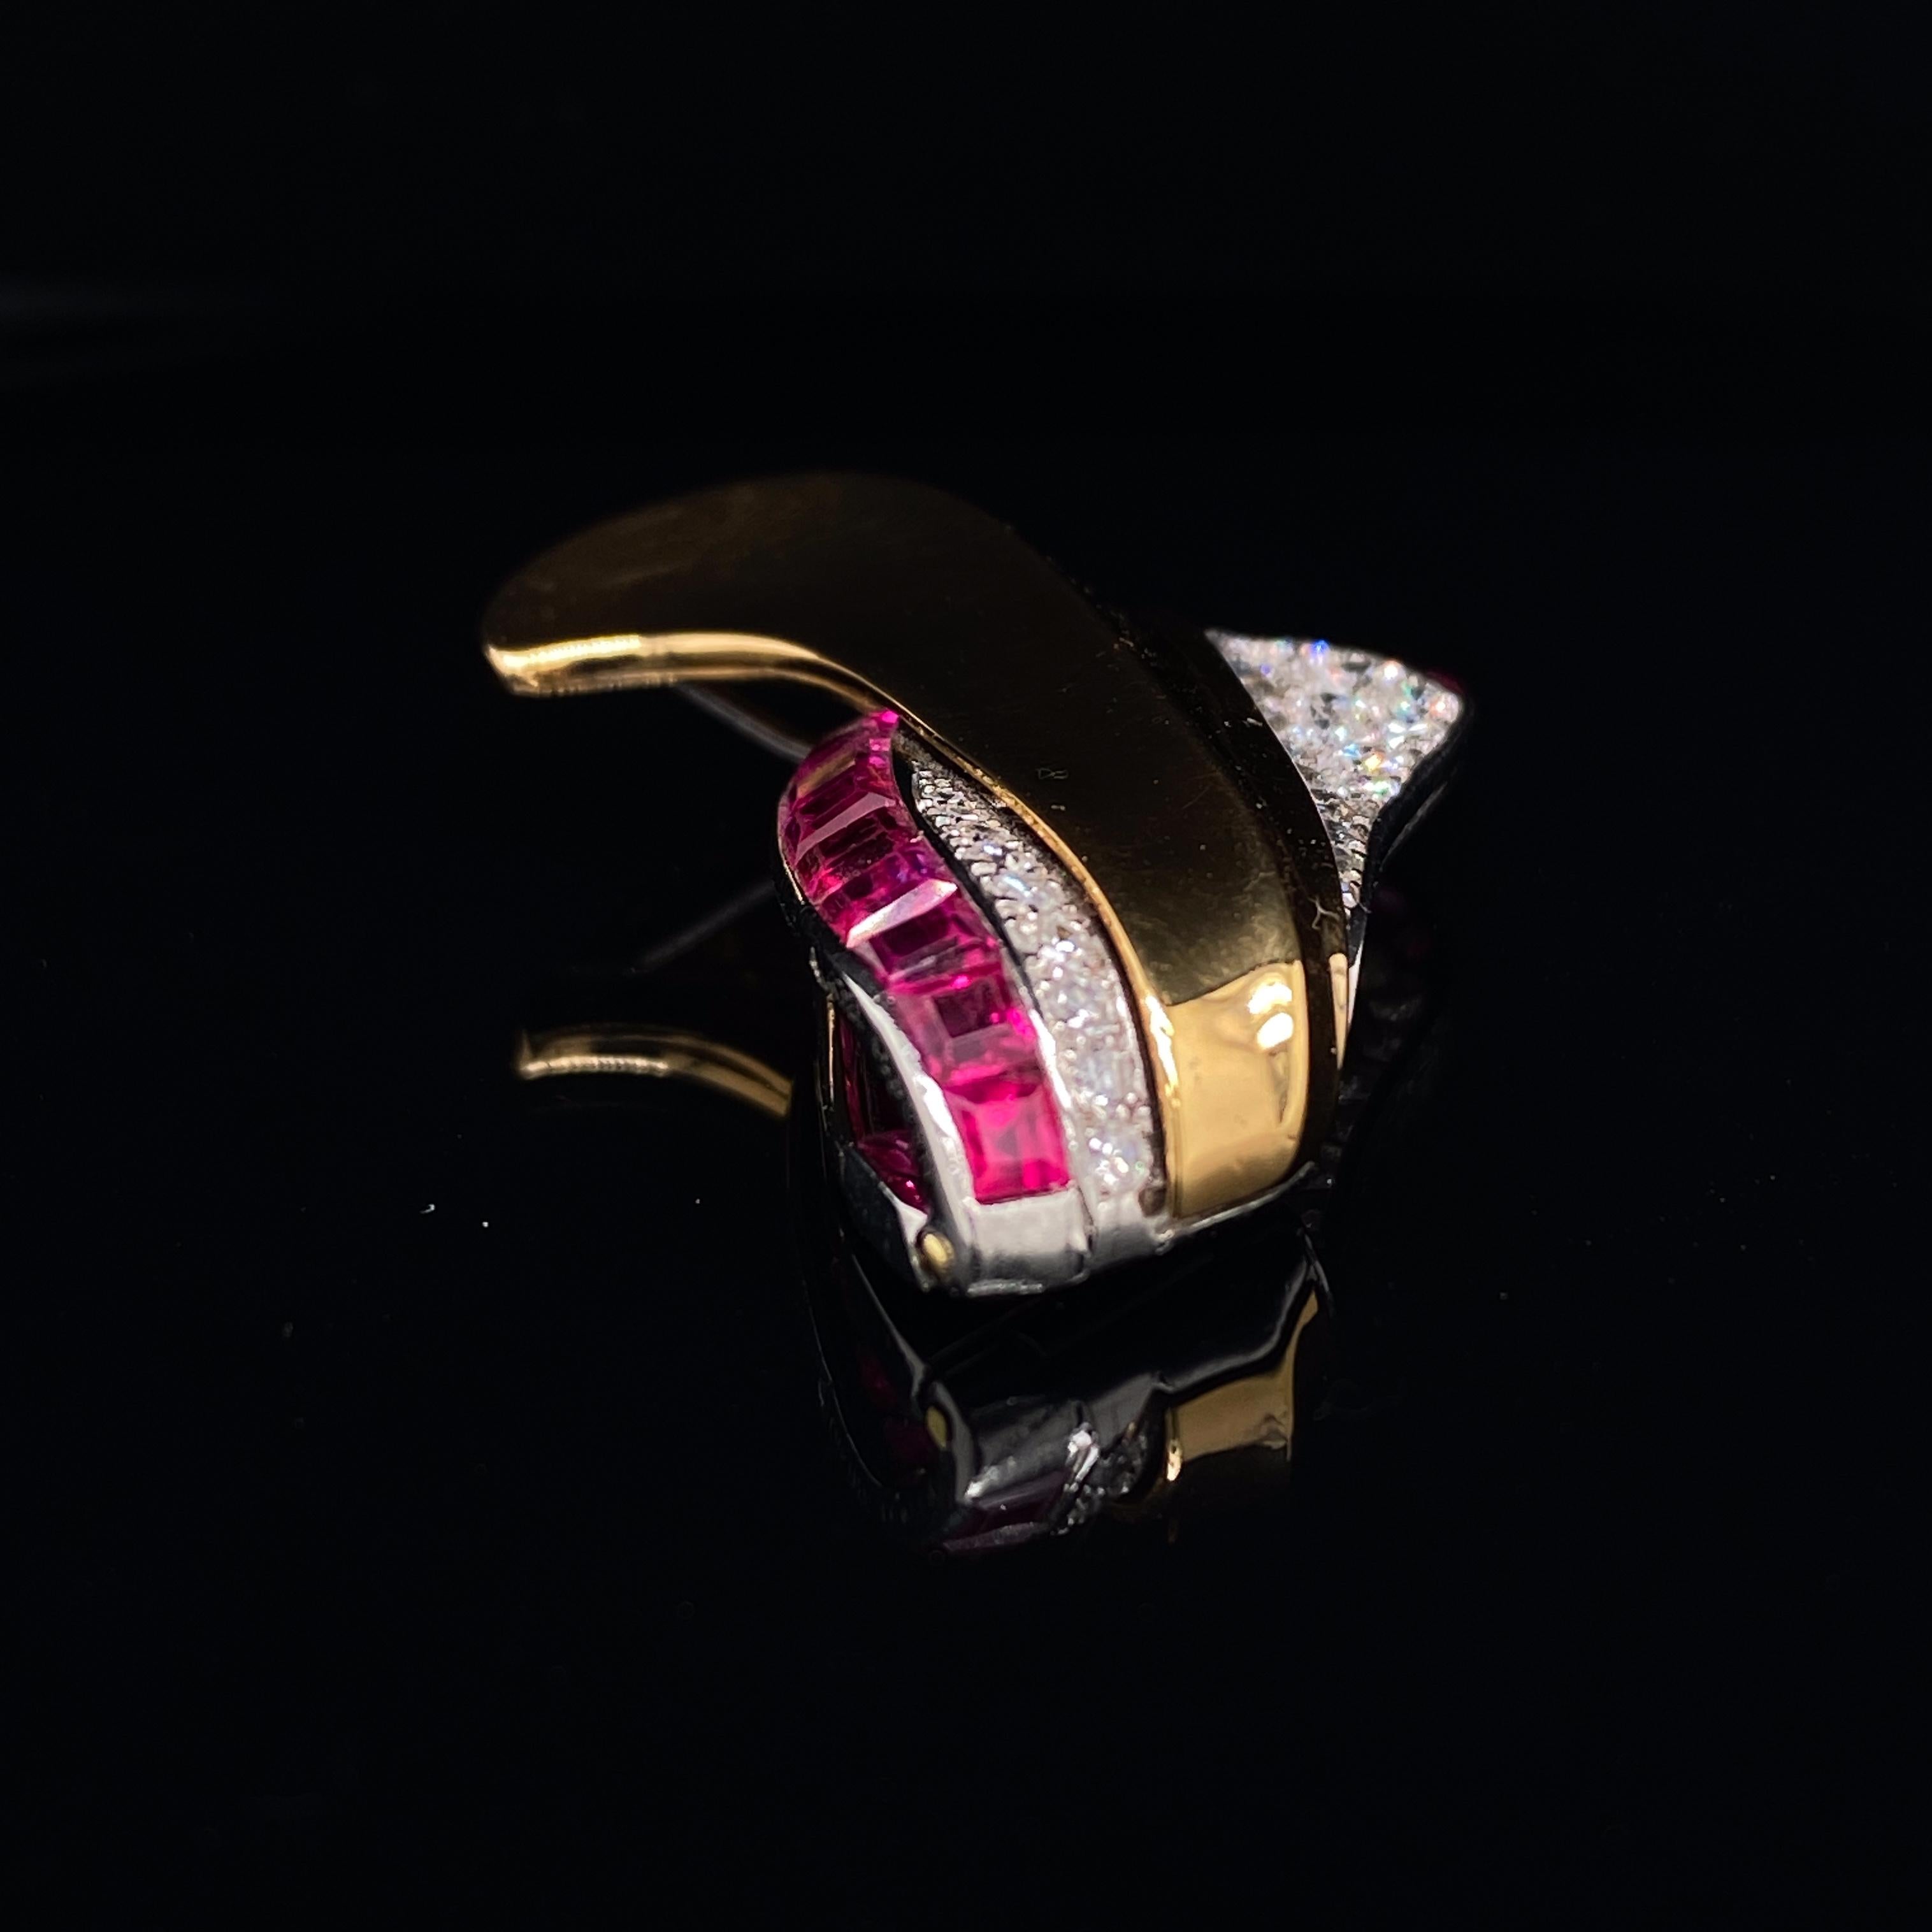 Cartier ruby and diamond 18 karat yellow gold brooch circa 1950.

This elegant brooch comprises of calibre cut rubies set within a fine platinum border against contrasting grain set transitional cut diamonds in an organic flowing design.  The whole